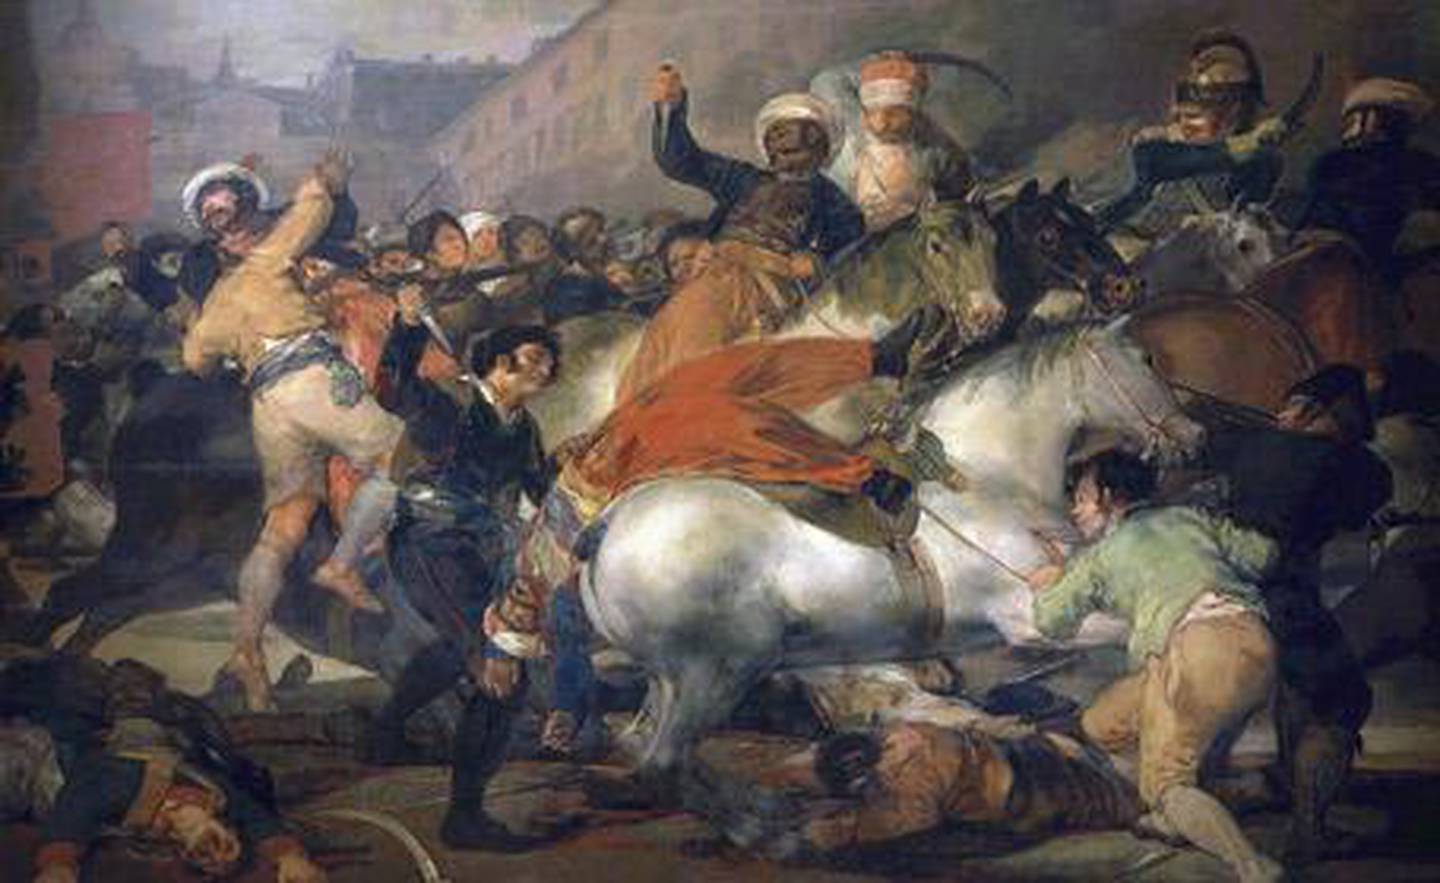 Mamluk soldiers serving in Napoleon's army battle Spanish rebels in Goya's The Second of May 1808 (The Charge of the Mamelukes).